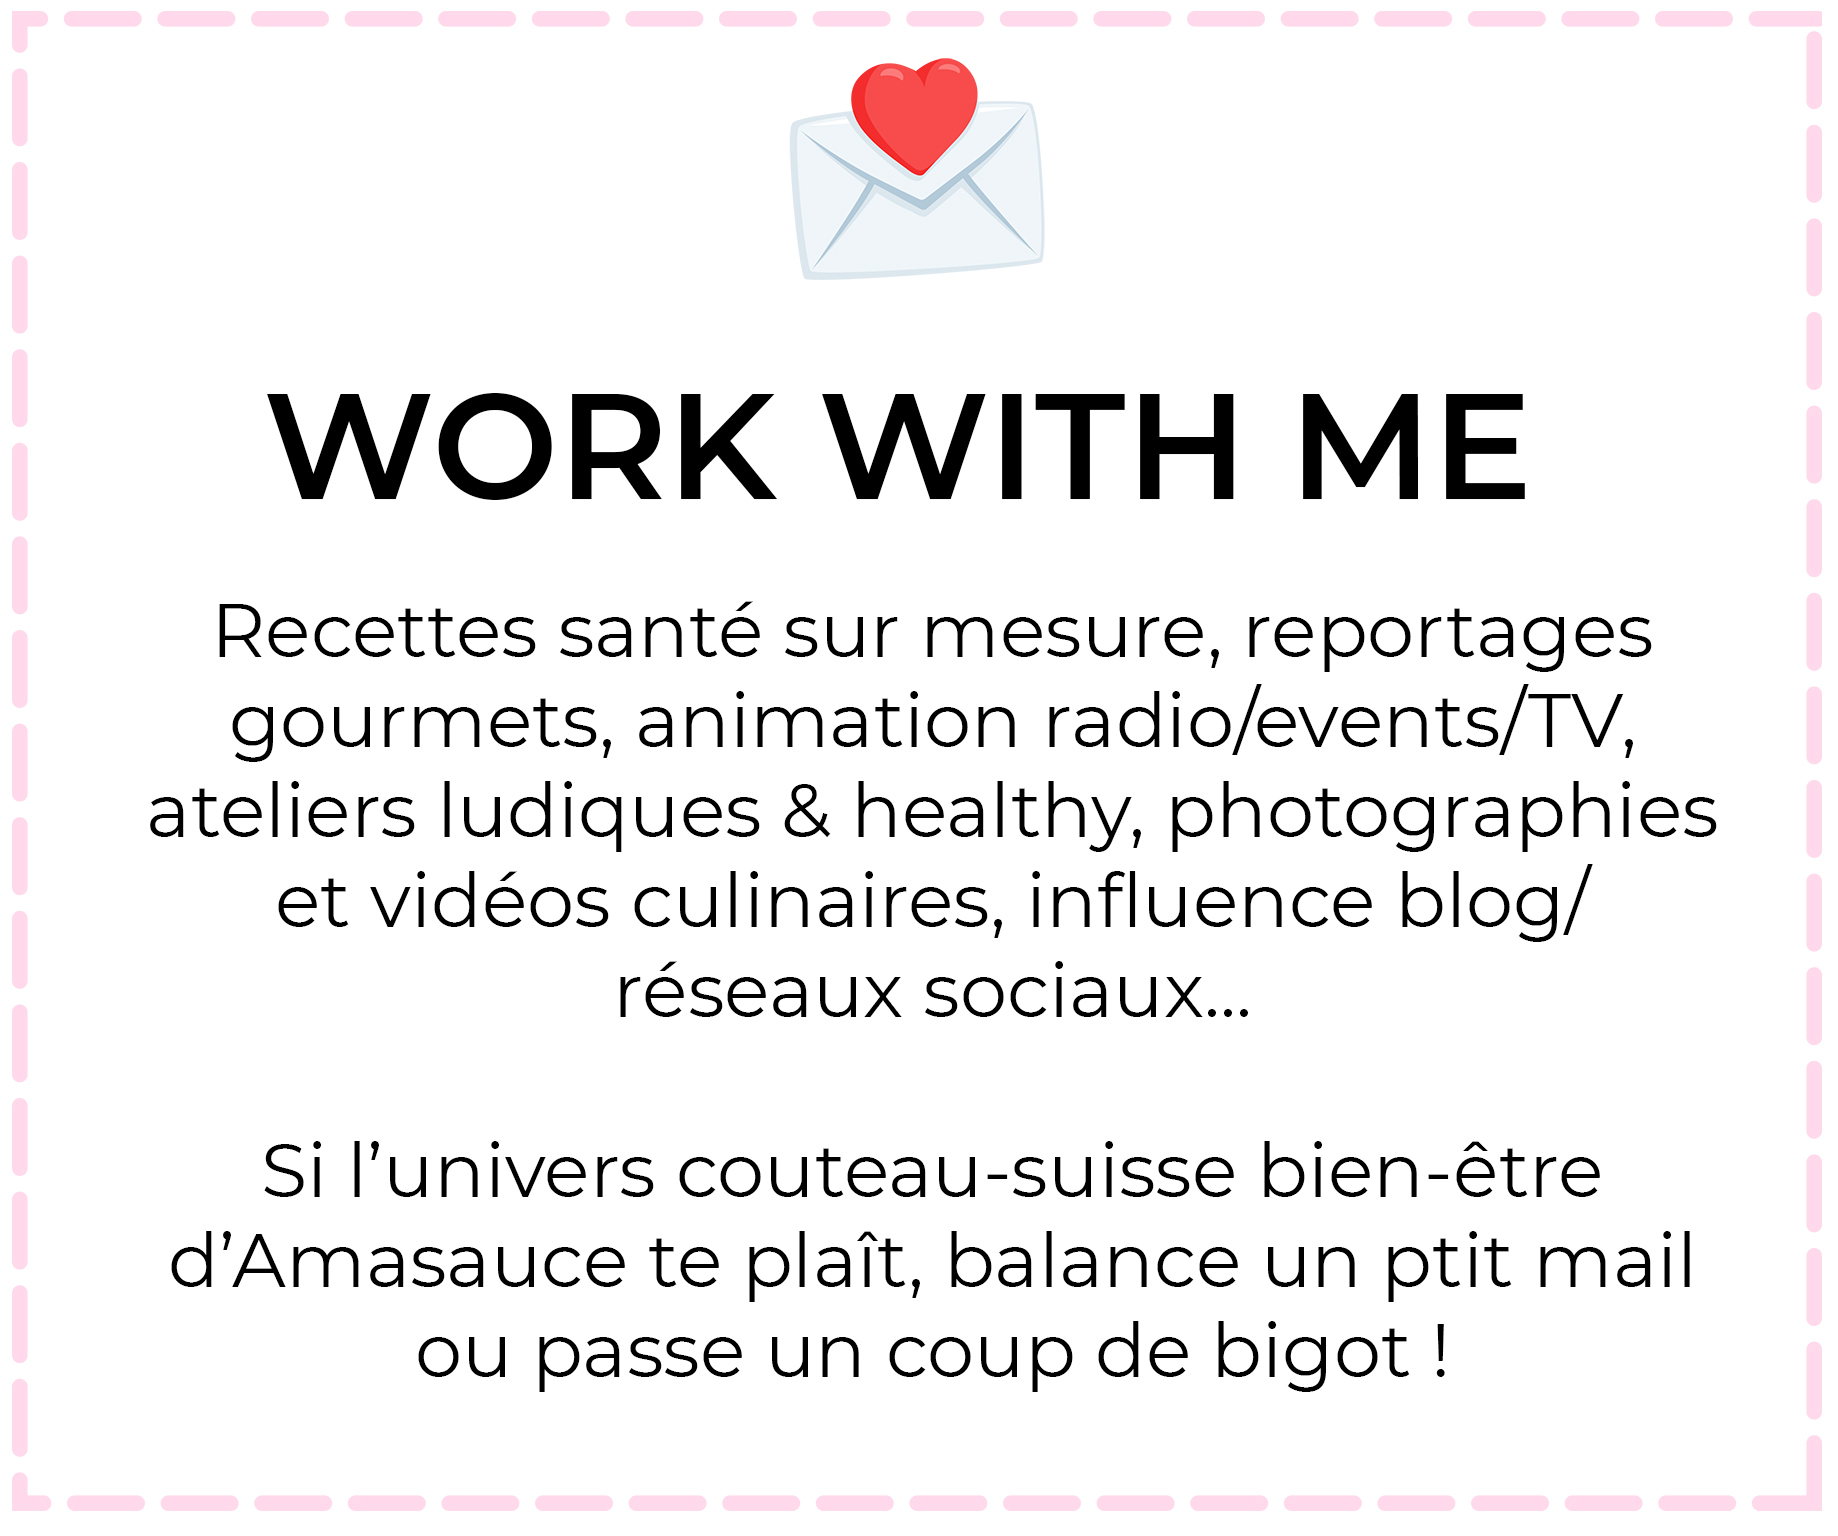 Work with me!